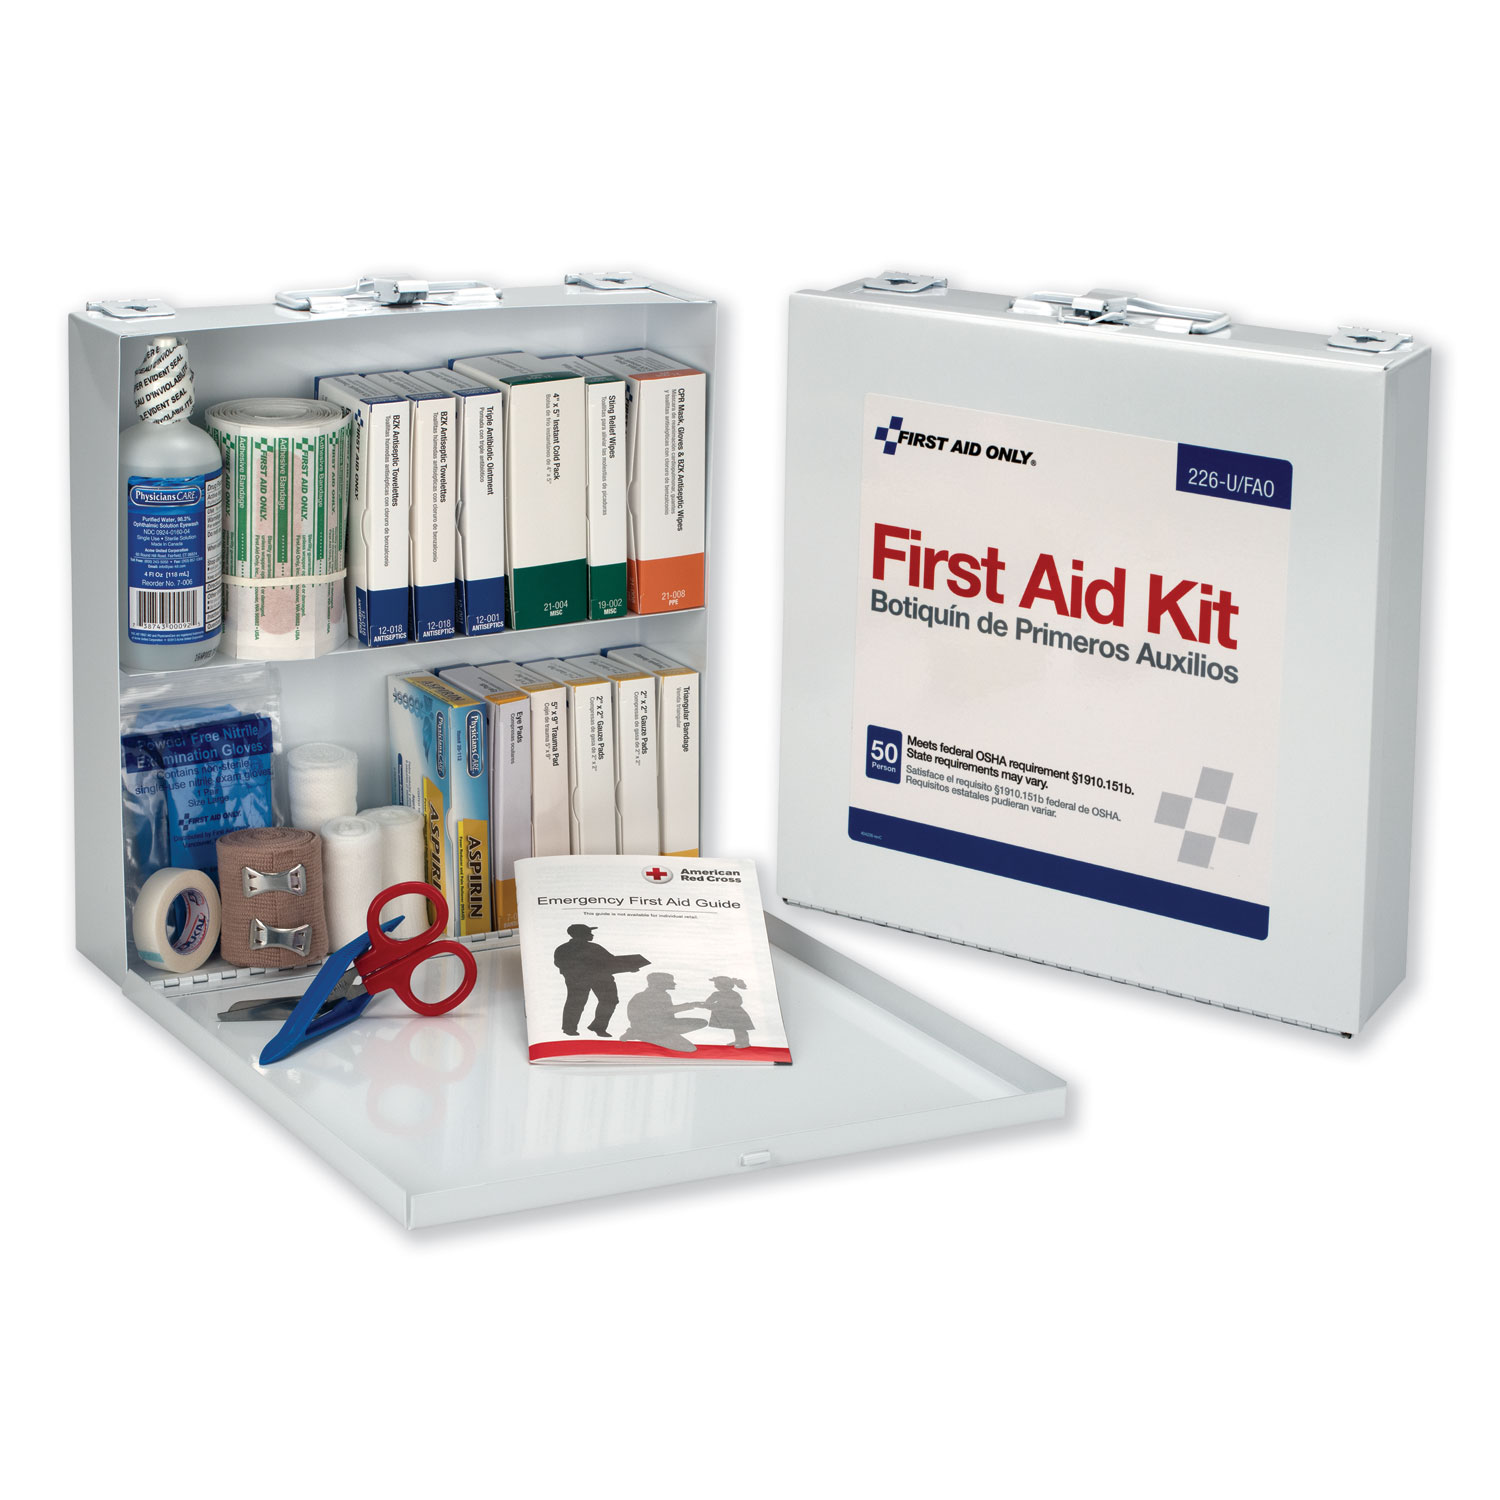  First Aid Only 226-U/FAO First Aid Station for 50 People, 196-Pieces, OSHA Compliant, Metal Case (FAO226U) 